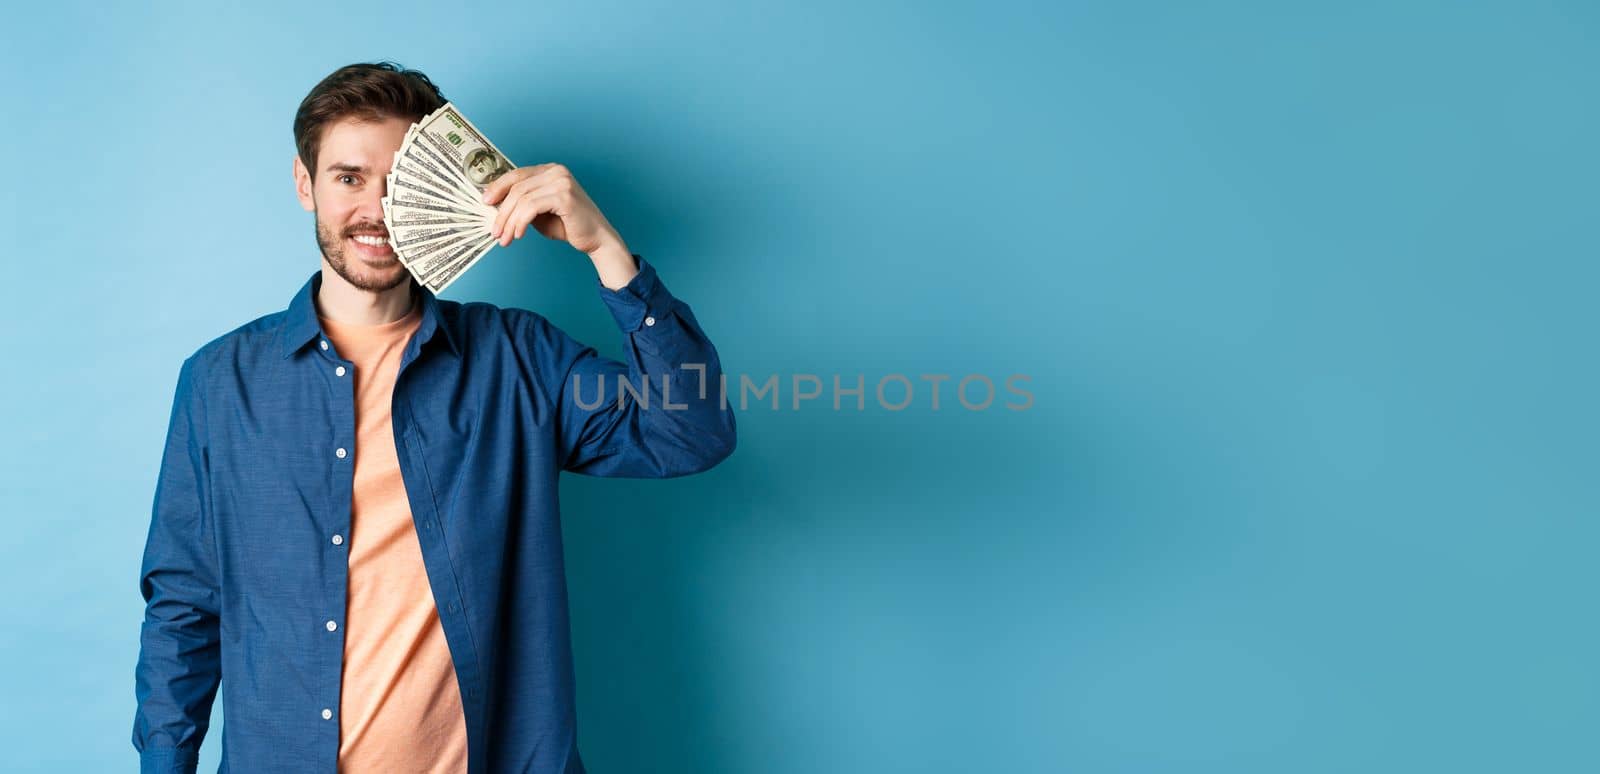 Happy young guy covering half of face with dollars and smiling, winning prize money, standing on blue background.